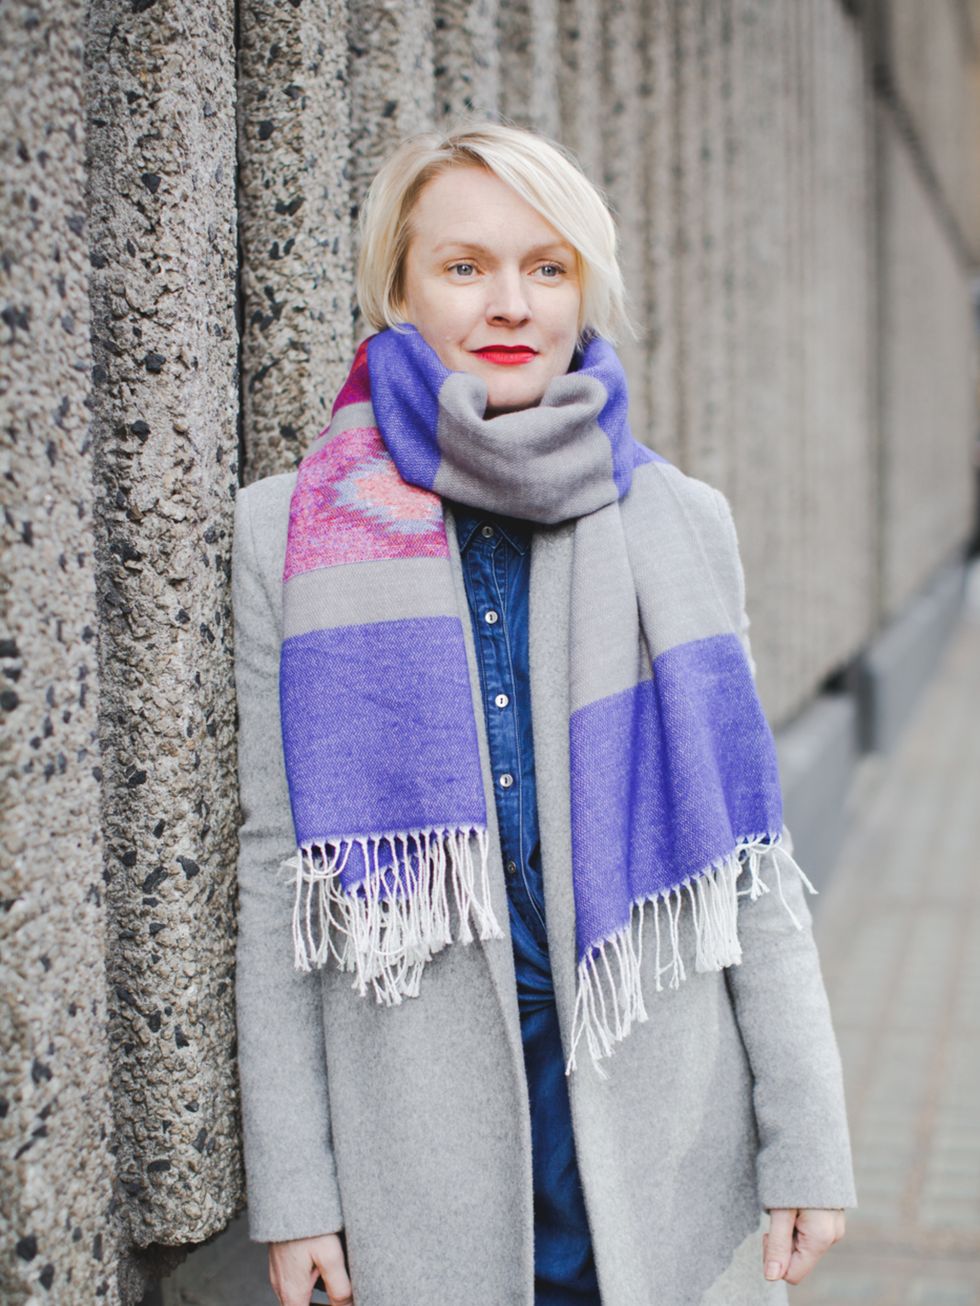 <p>Lorraine Candy - Editor-in-Chief.</p>

<p>Freda at Matches coat, MiH dress, Superdry scarf.</p>